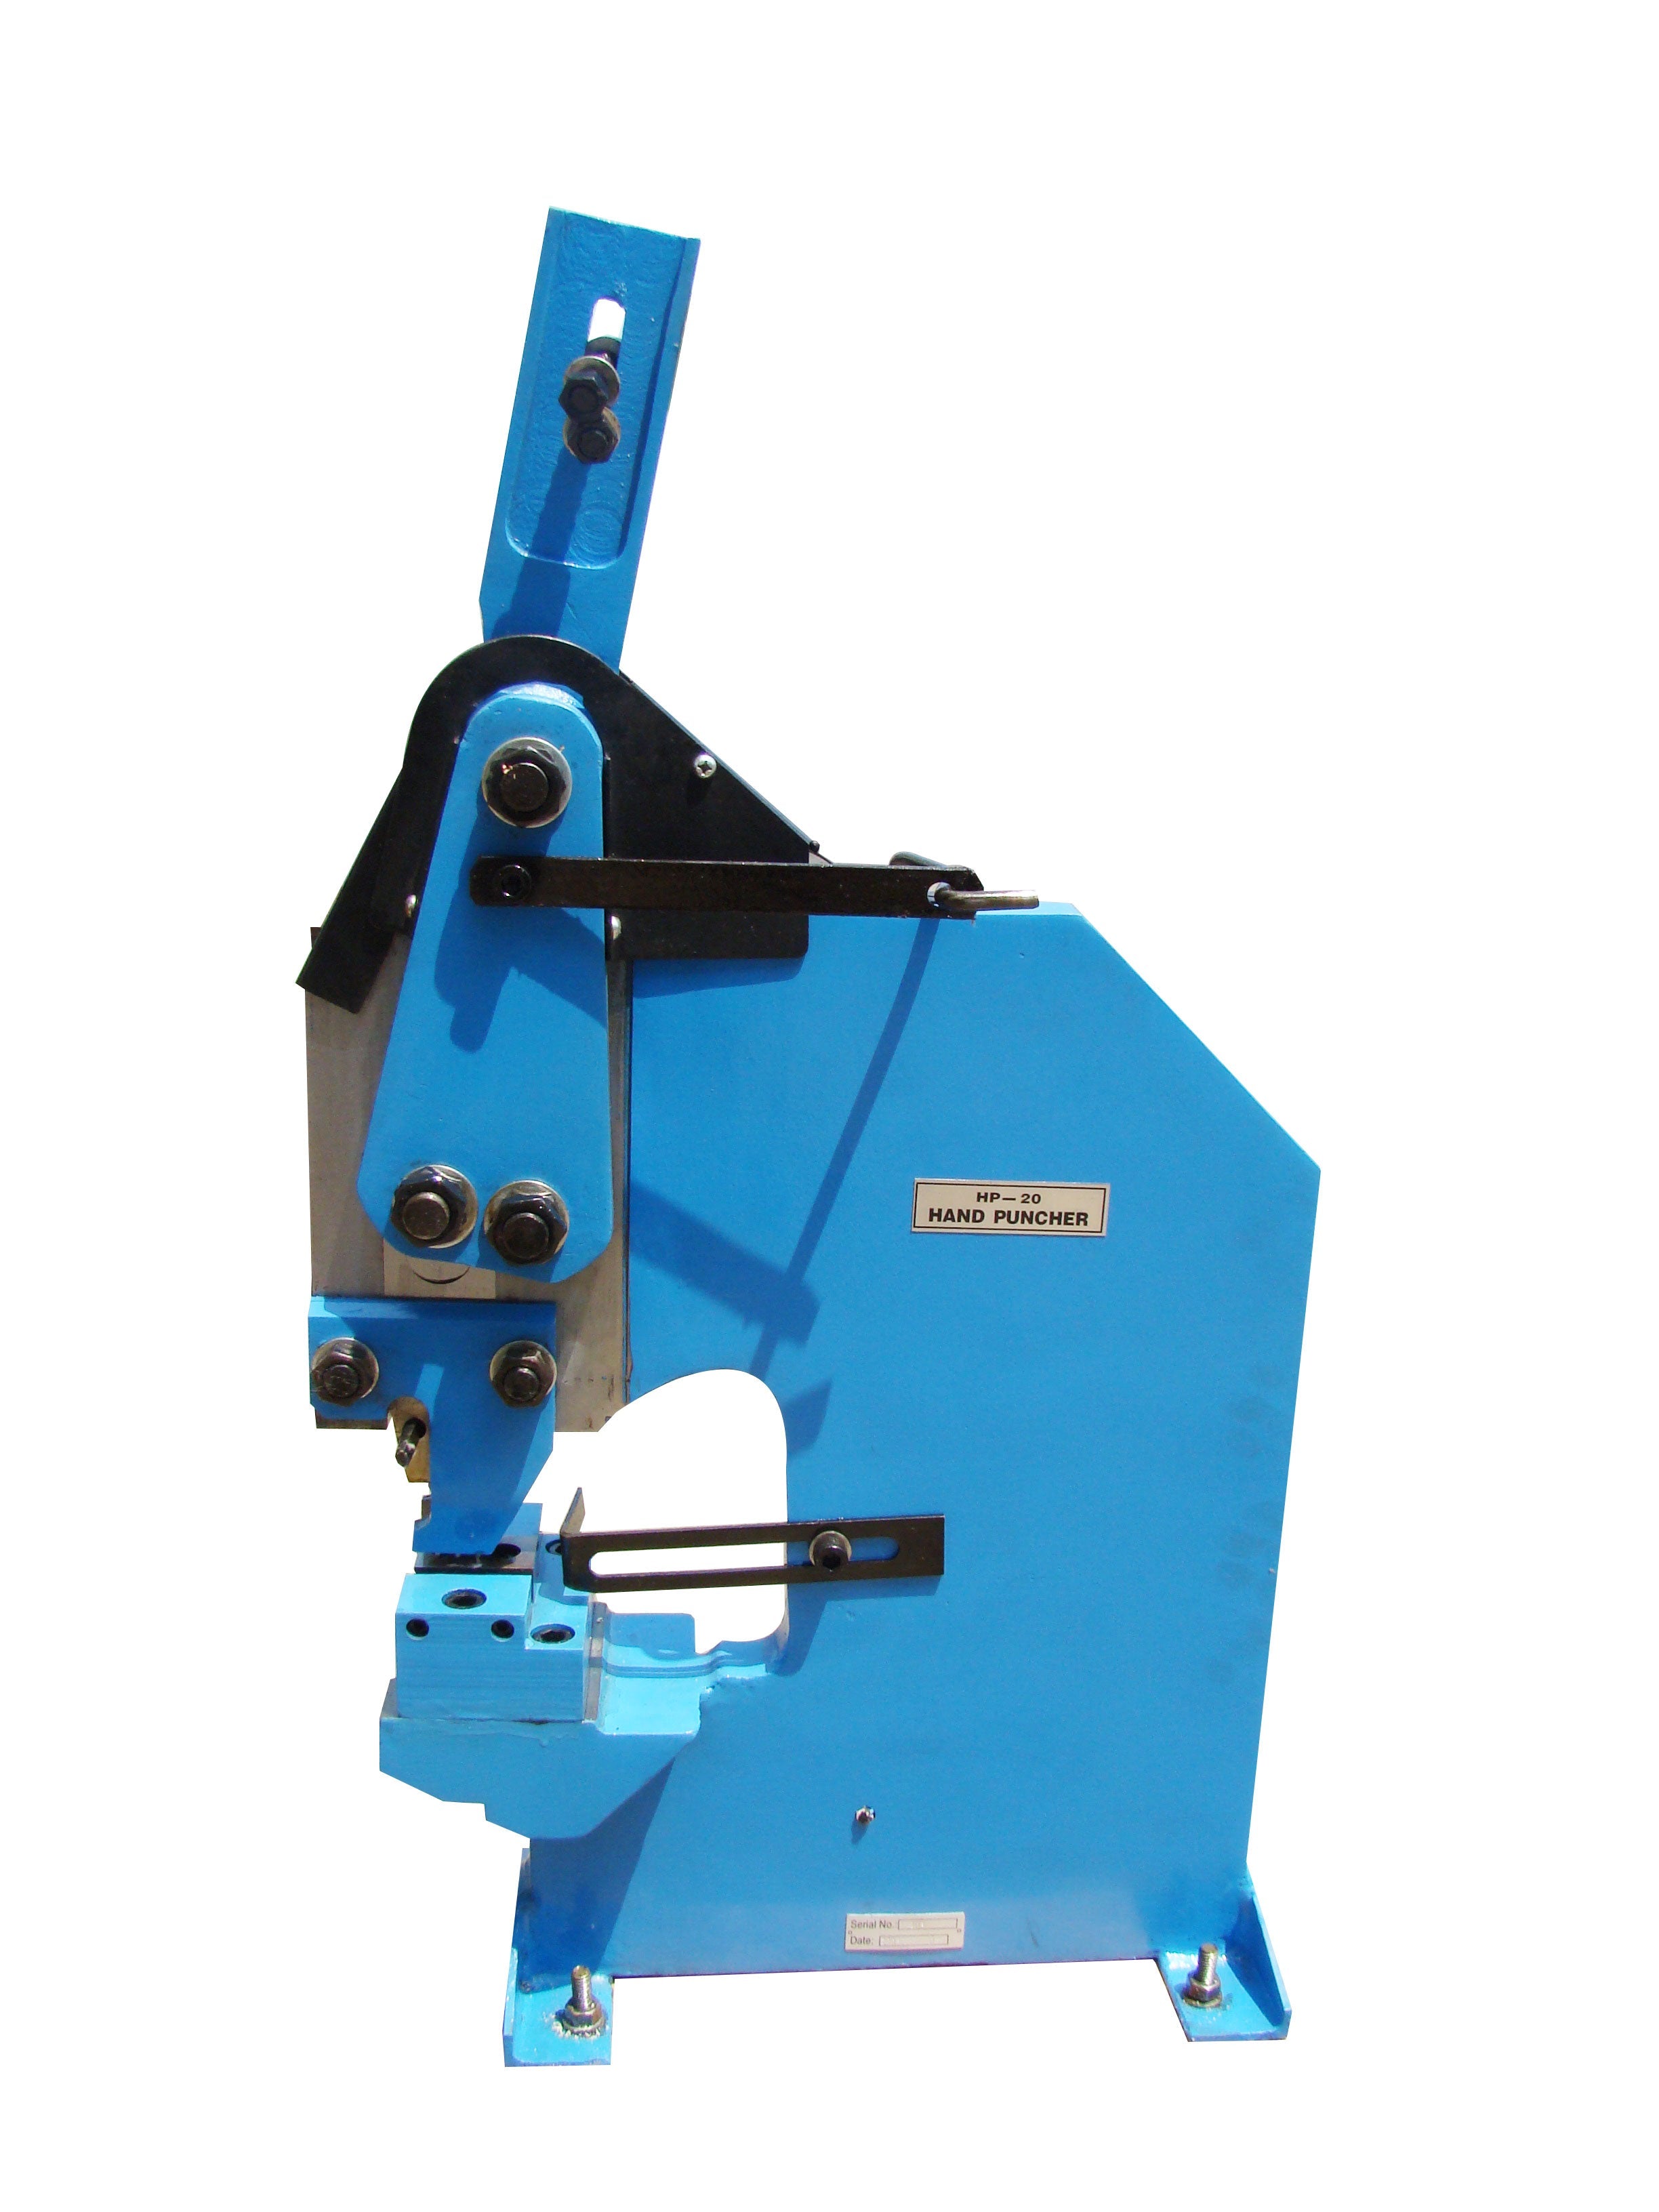 Kaka Hp-20L Manual Sheet Metal Punch,sheet Metal Punch Machine,comes Standard with 1sets of Punches and Dies 5/8